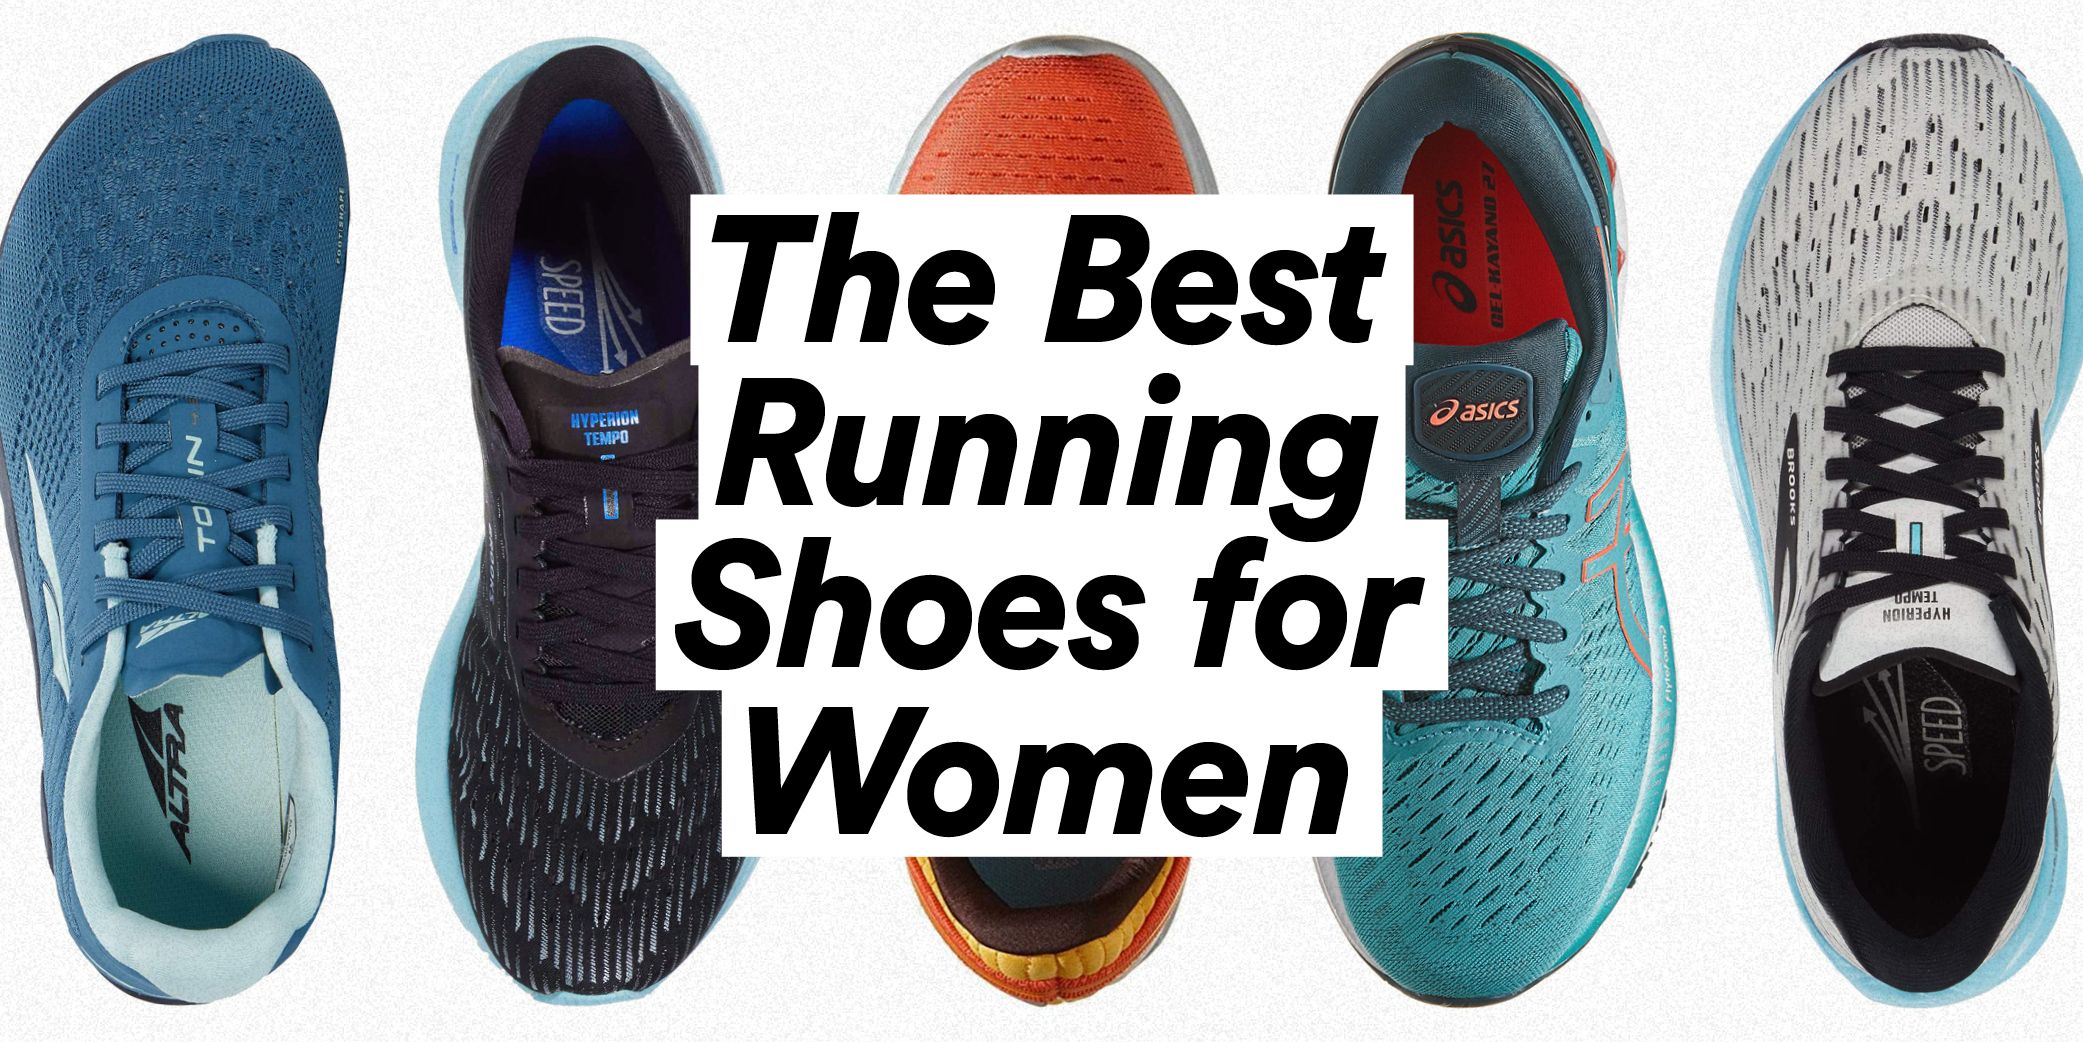 Tether Maladroit Oxidize Best Running Shoes Women 2020 Germany, SAVE 60% - lutheranems.com